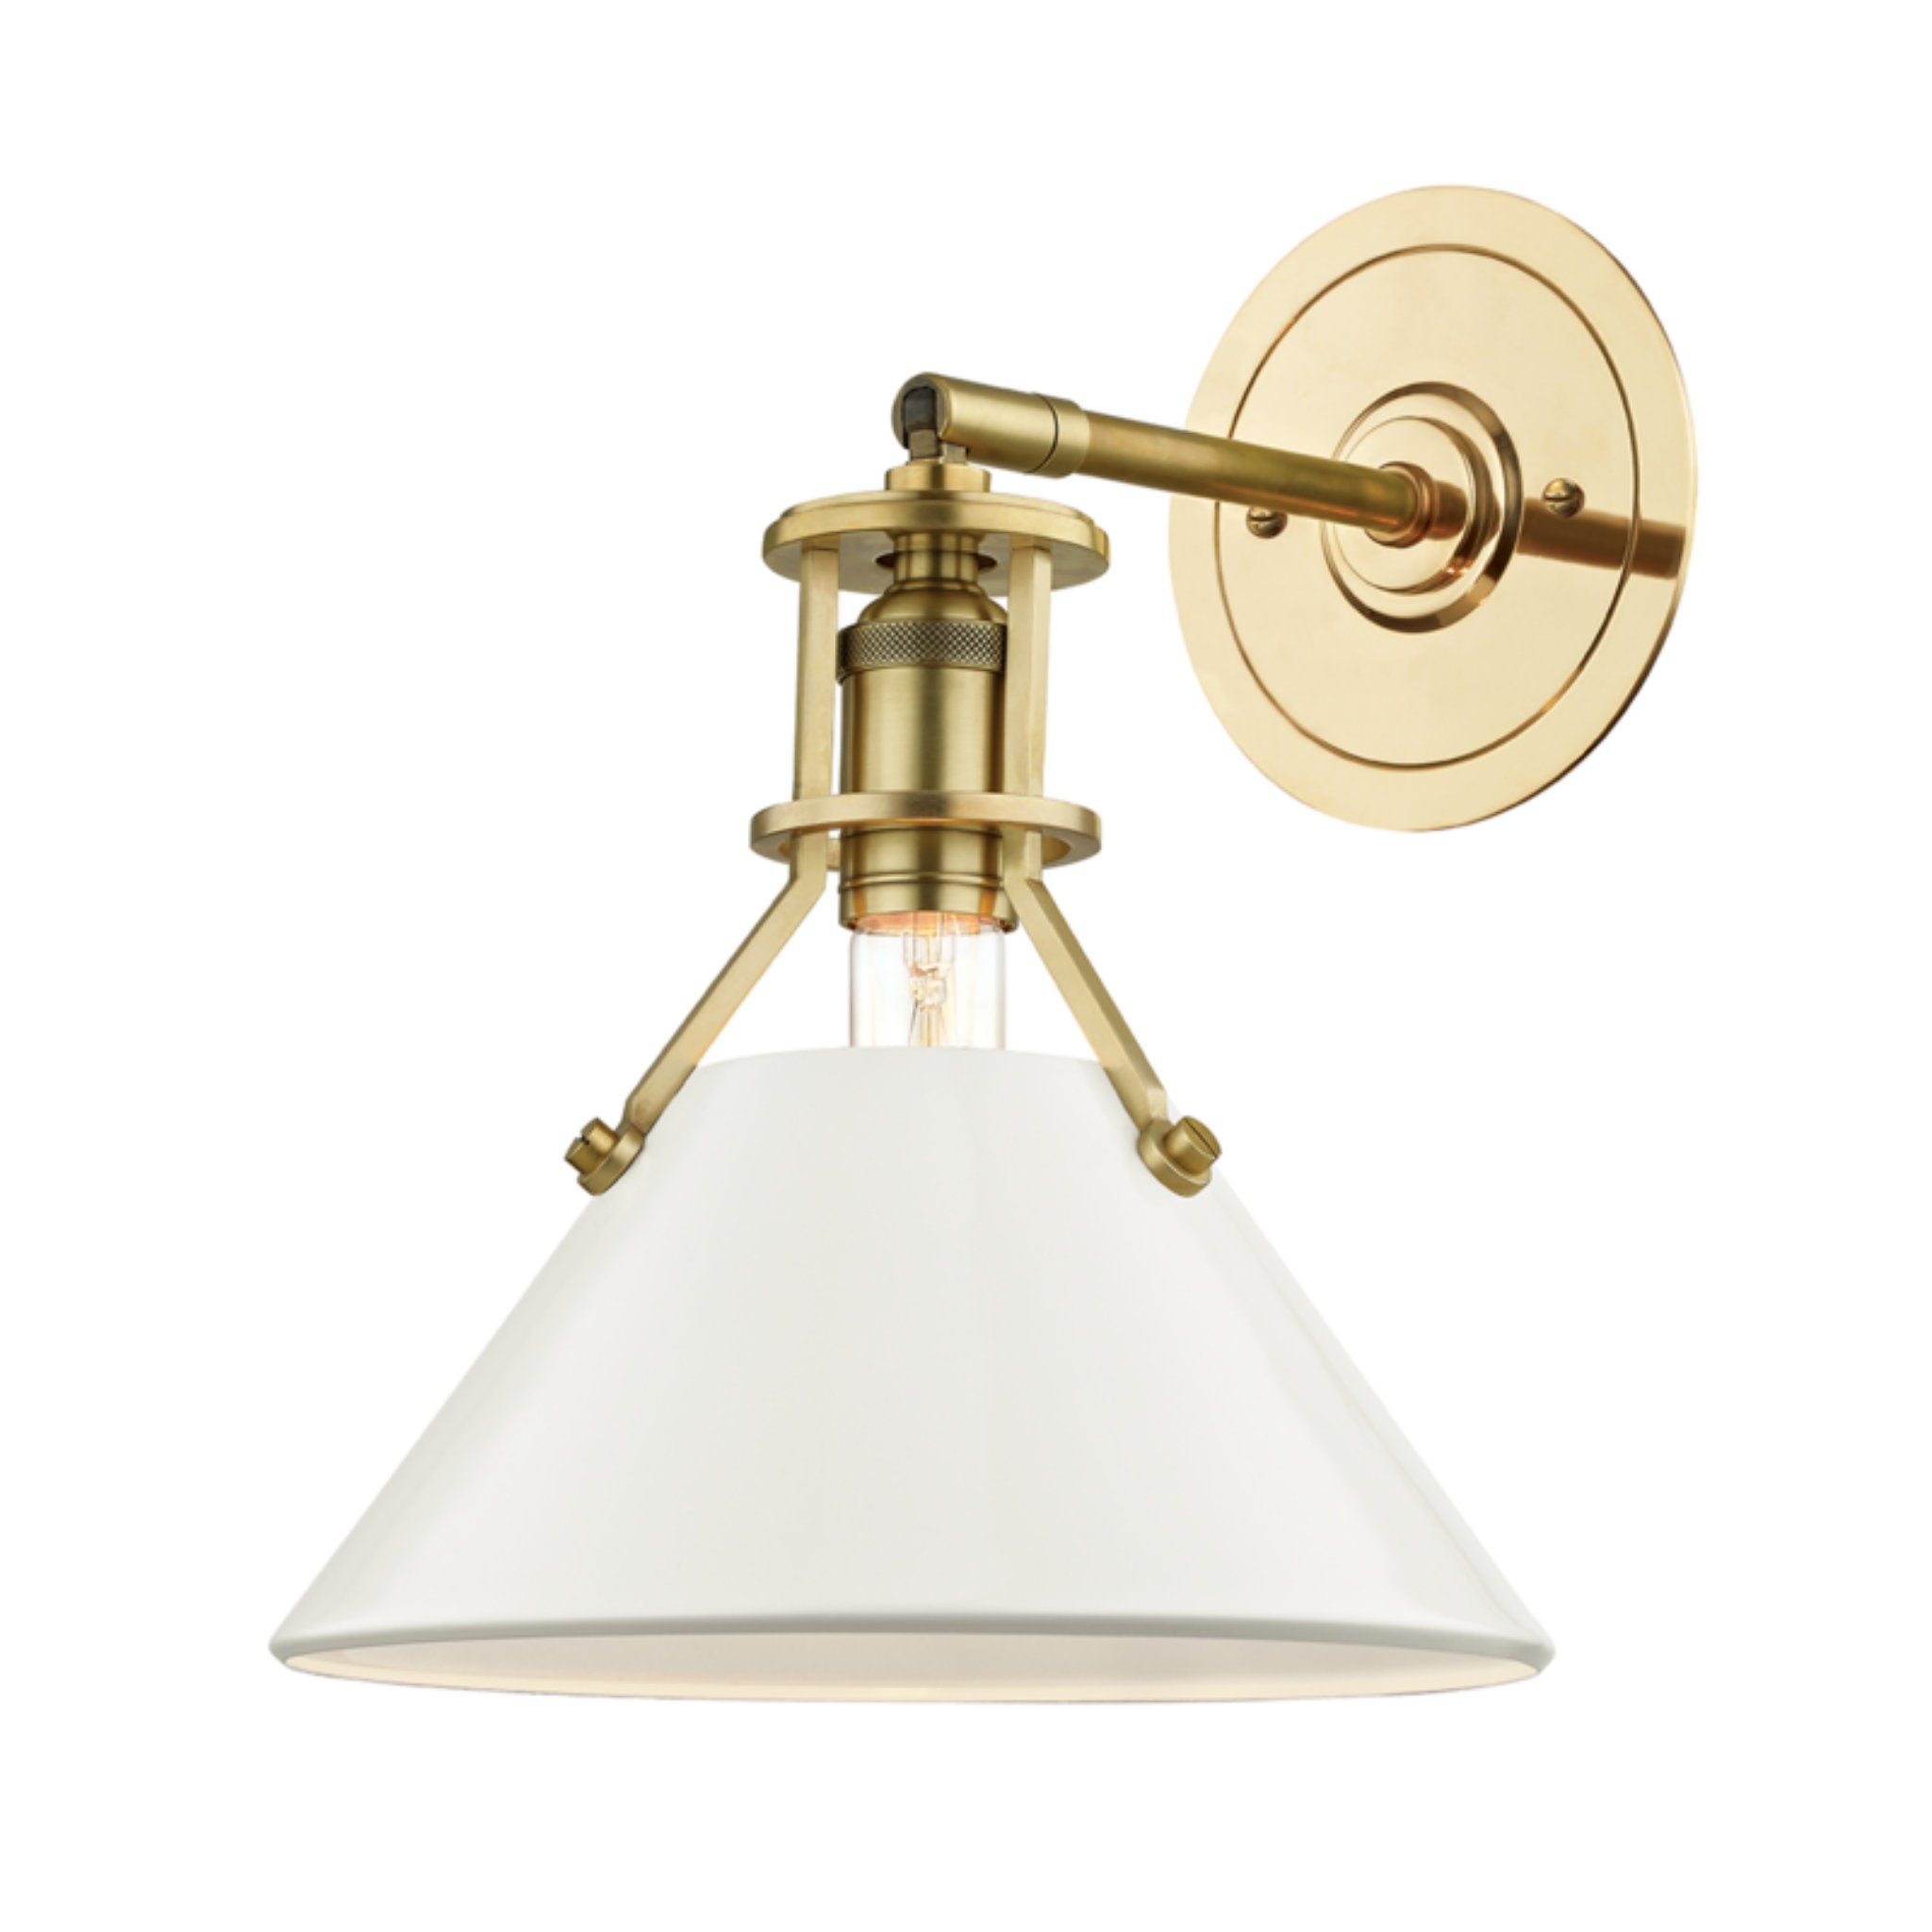 Painted No.2 1 Light Wall Sconce in Aged Brass/off White by Mark D. Sikes